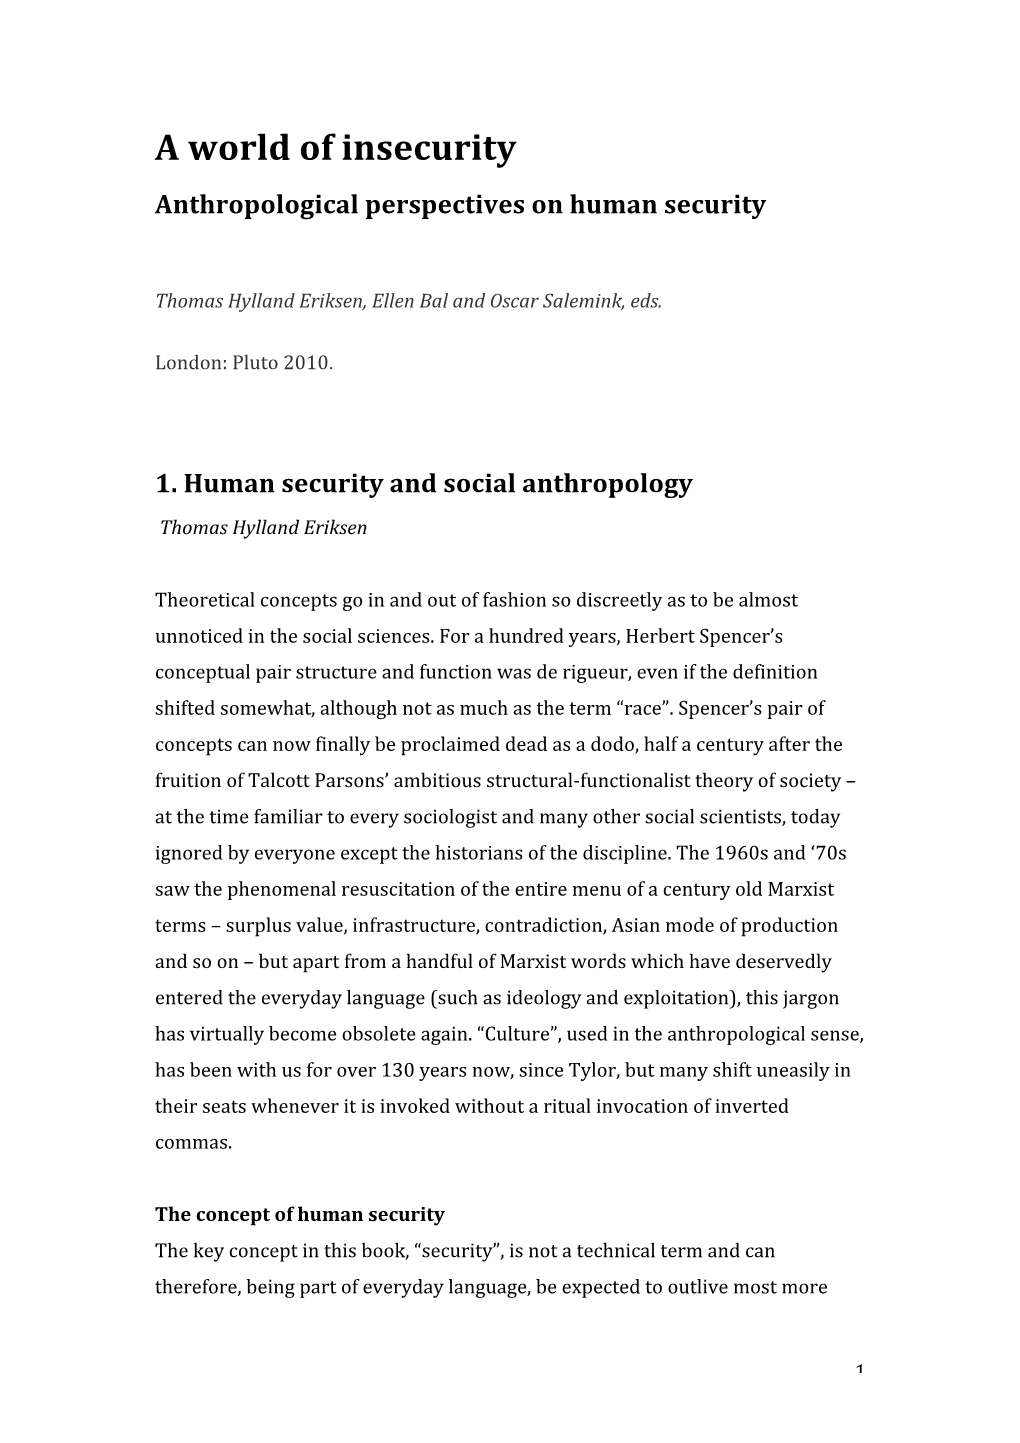 A World of Insecurity Anthropological Perspectives on Human Security